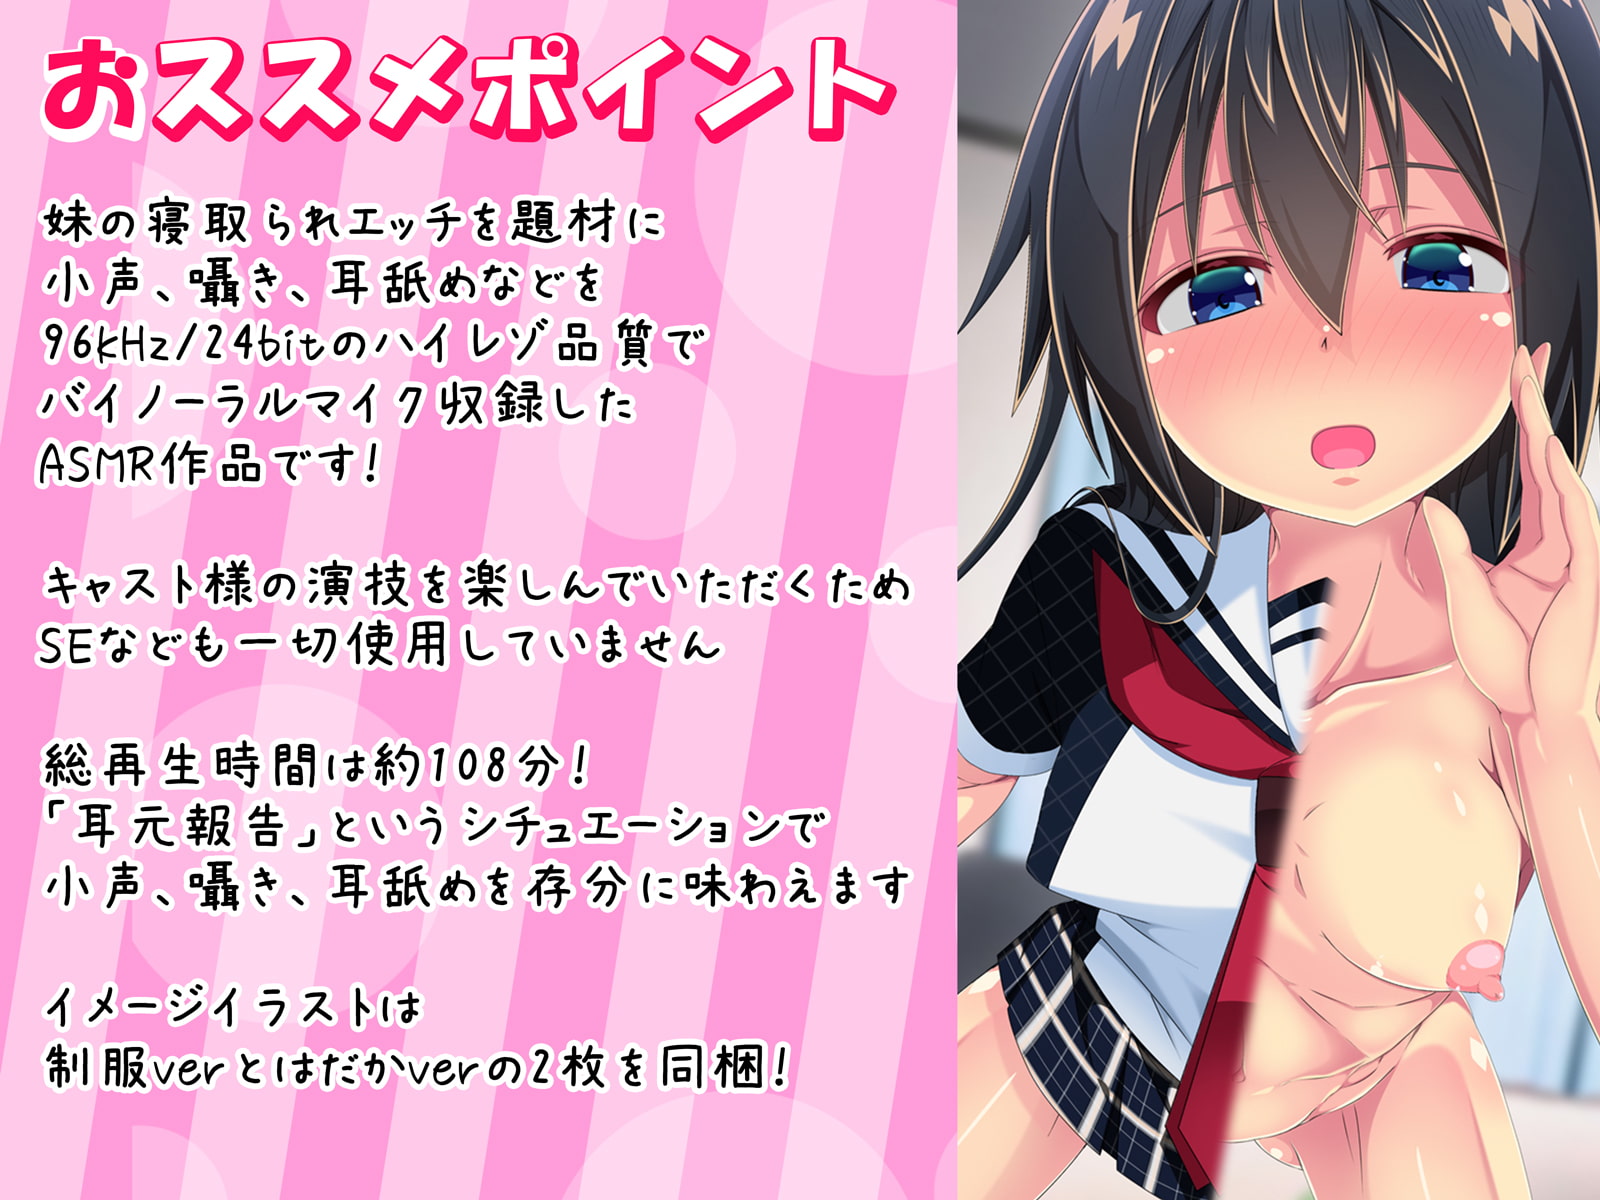 [Binaural] Your Little Sister Reports Her NTR Activity ~Ayumi~